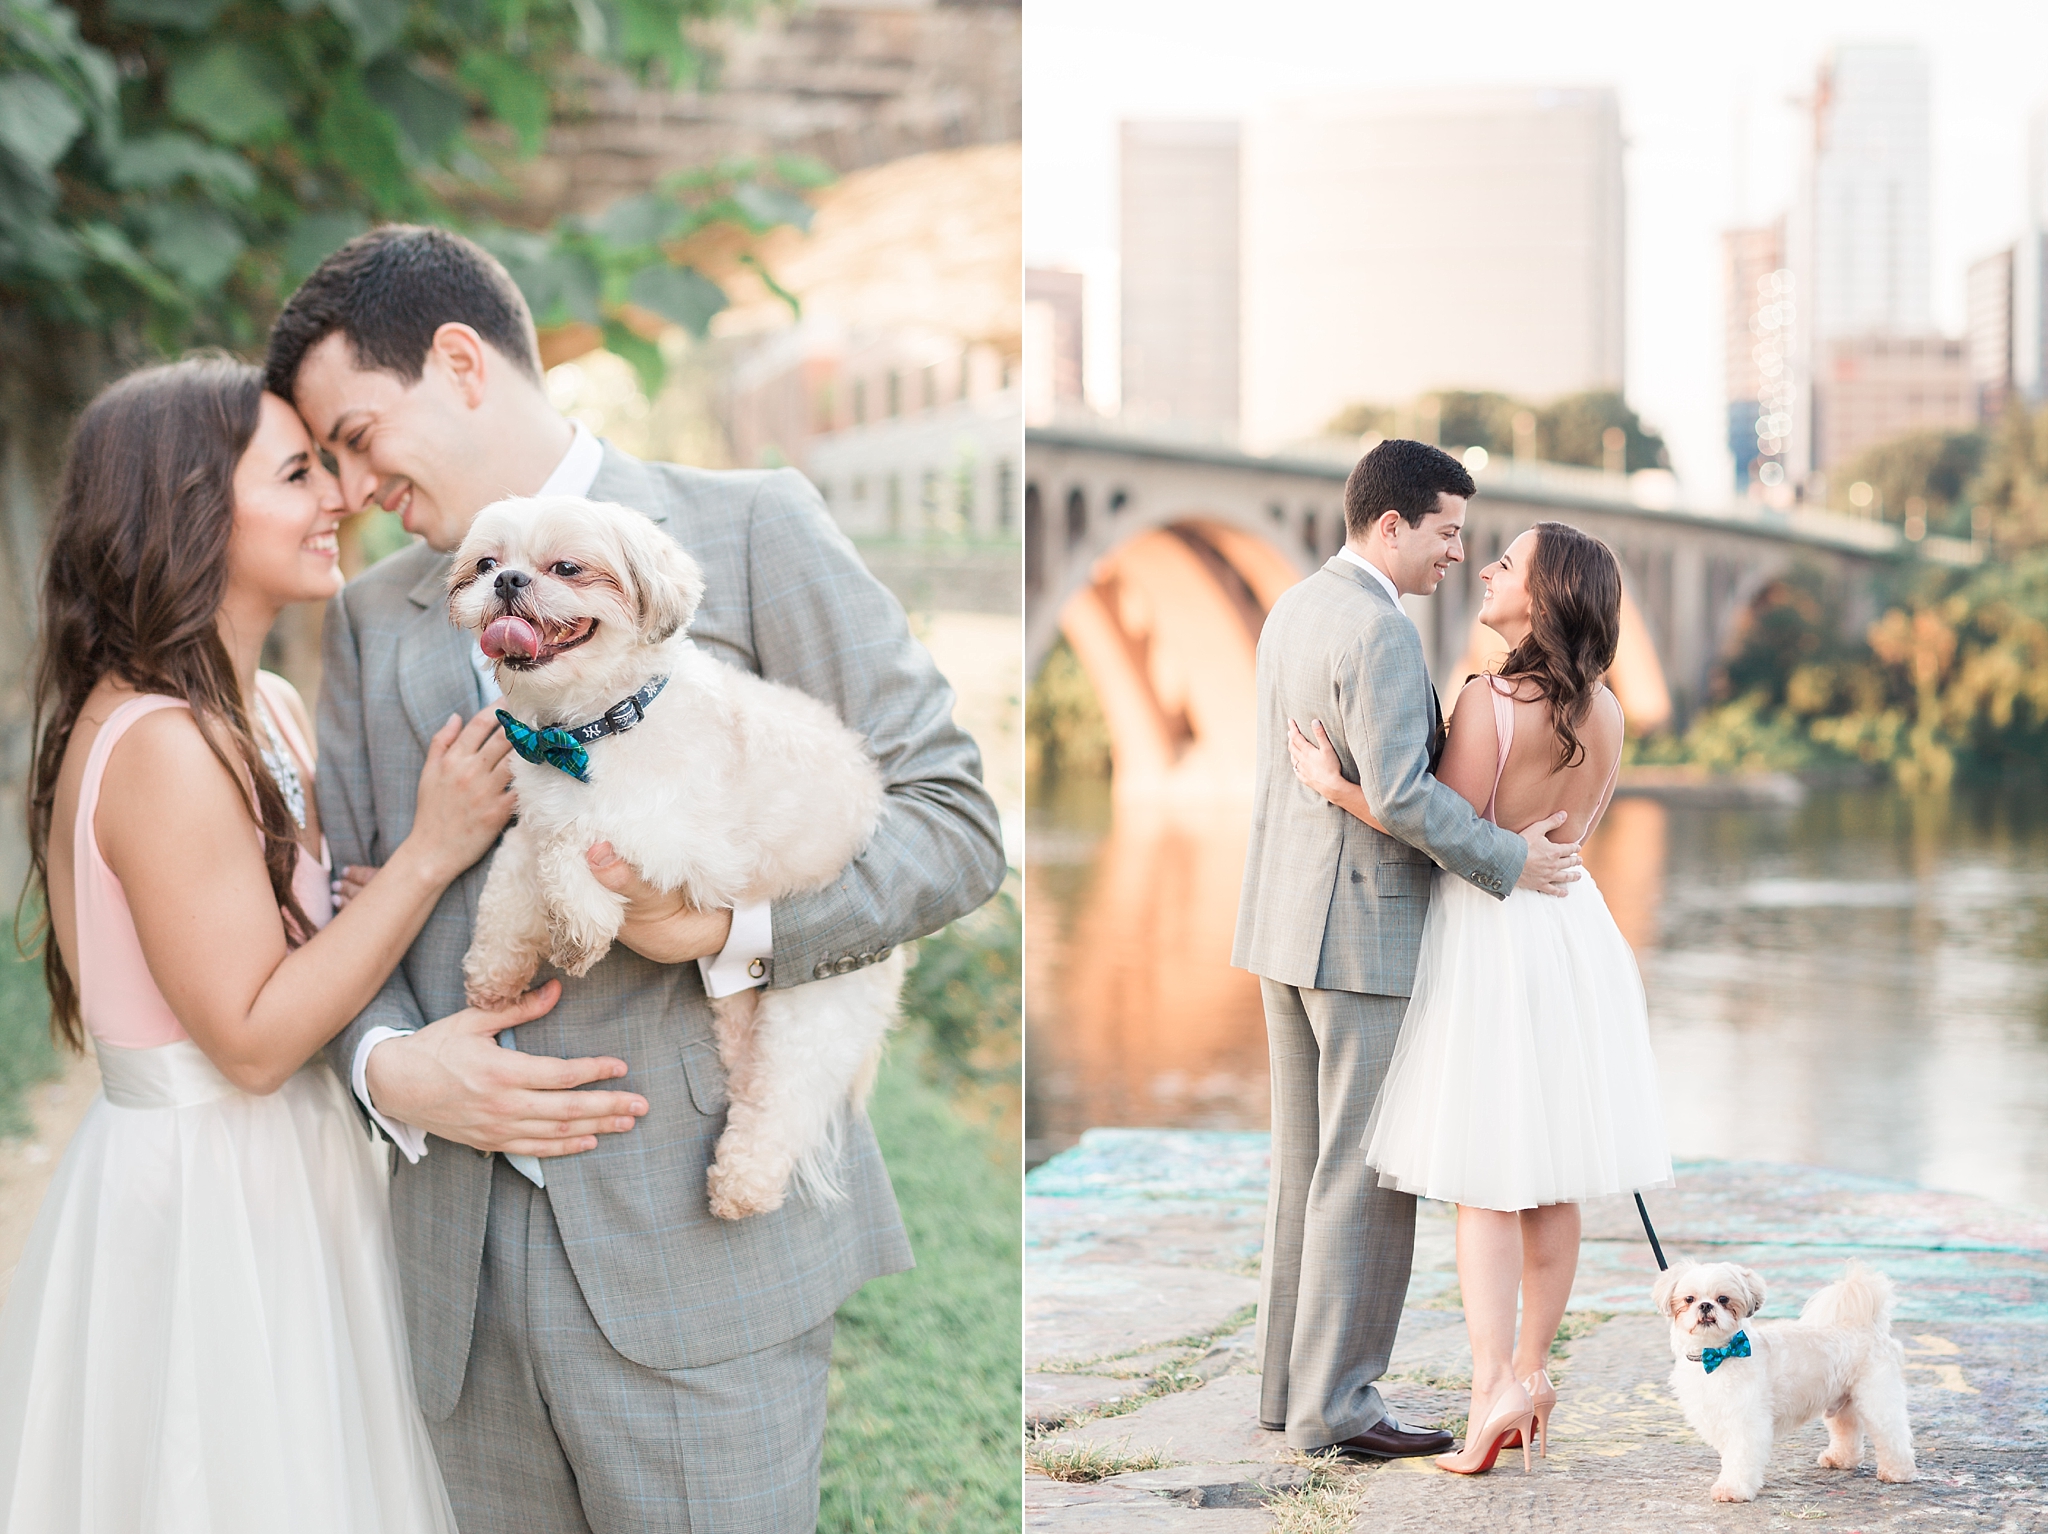 This Washington, DC wedding photographer shares a few tips that will help couples prepare the dogs to be part of an upcoming engagement shoot or wedding day!